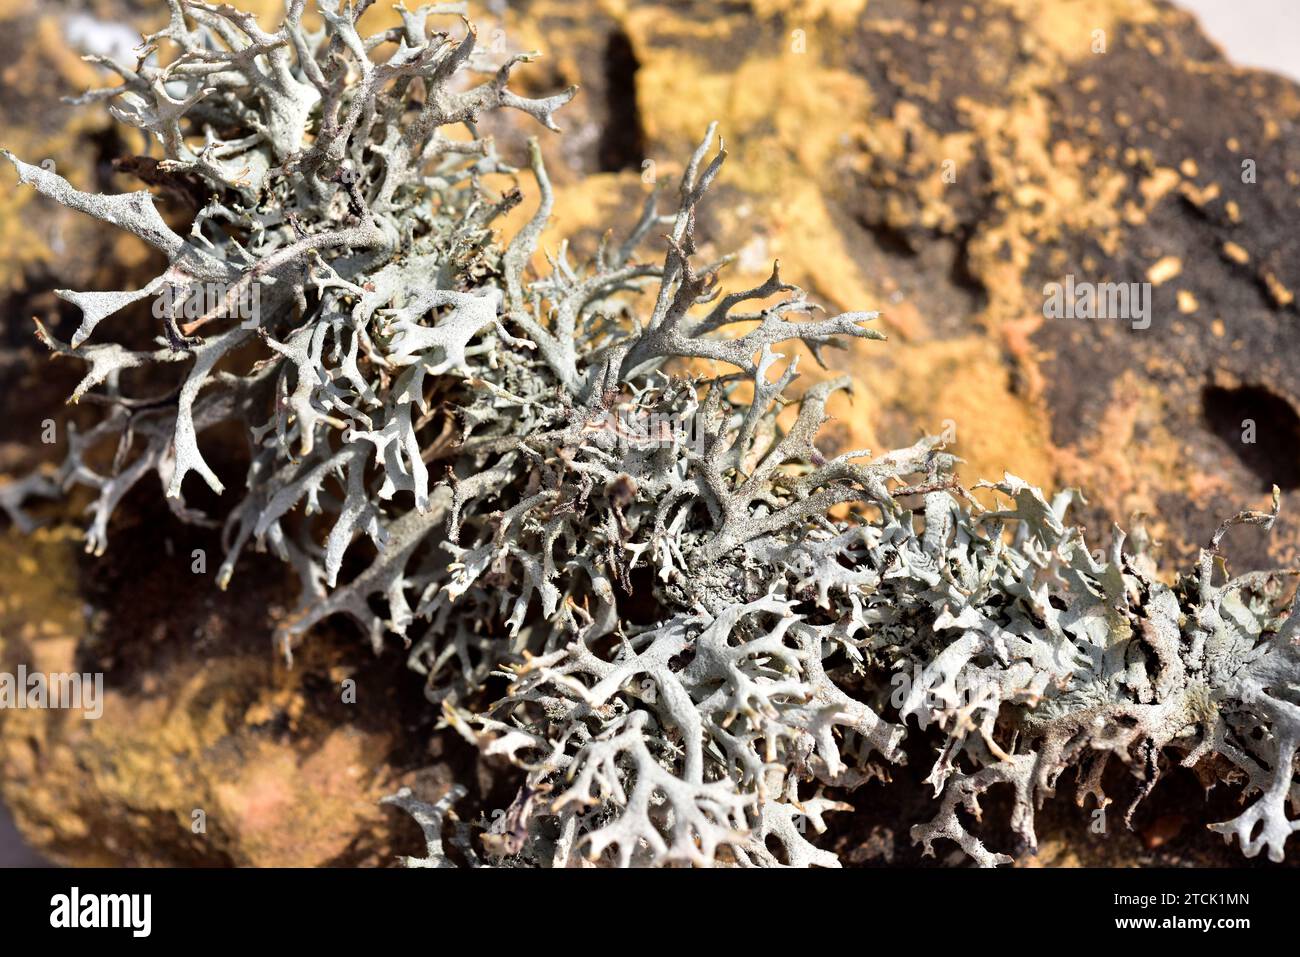 Pseudevernia furfuracea is a fruticose lichen that grows on bark tree. This photo was taken in La Cerdanya, Girona province, Catalonia, Spain. Stock Photo